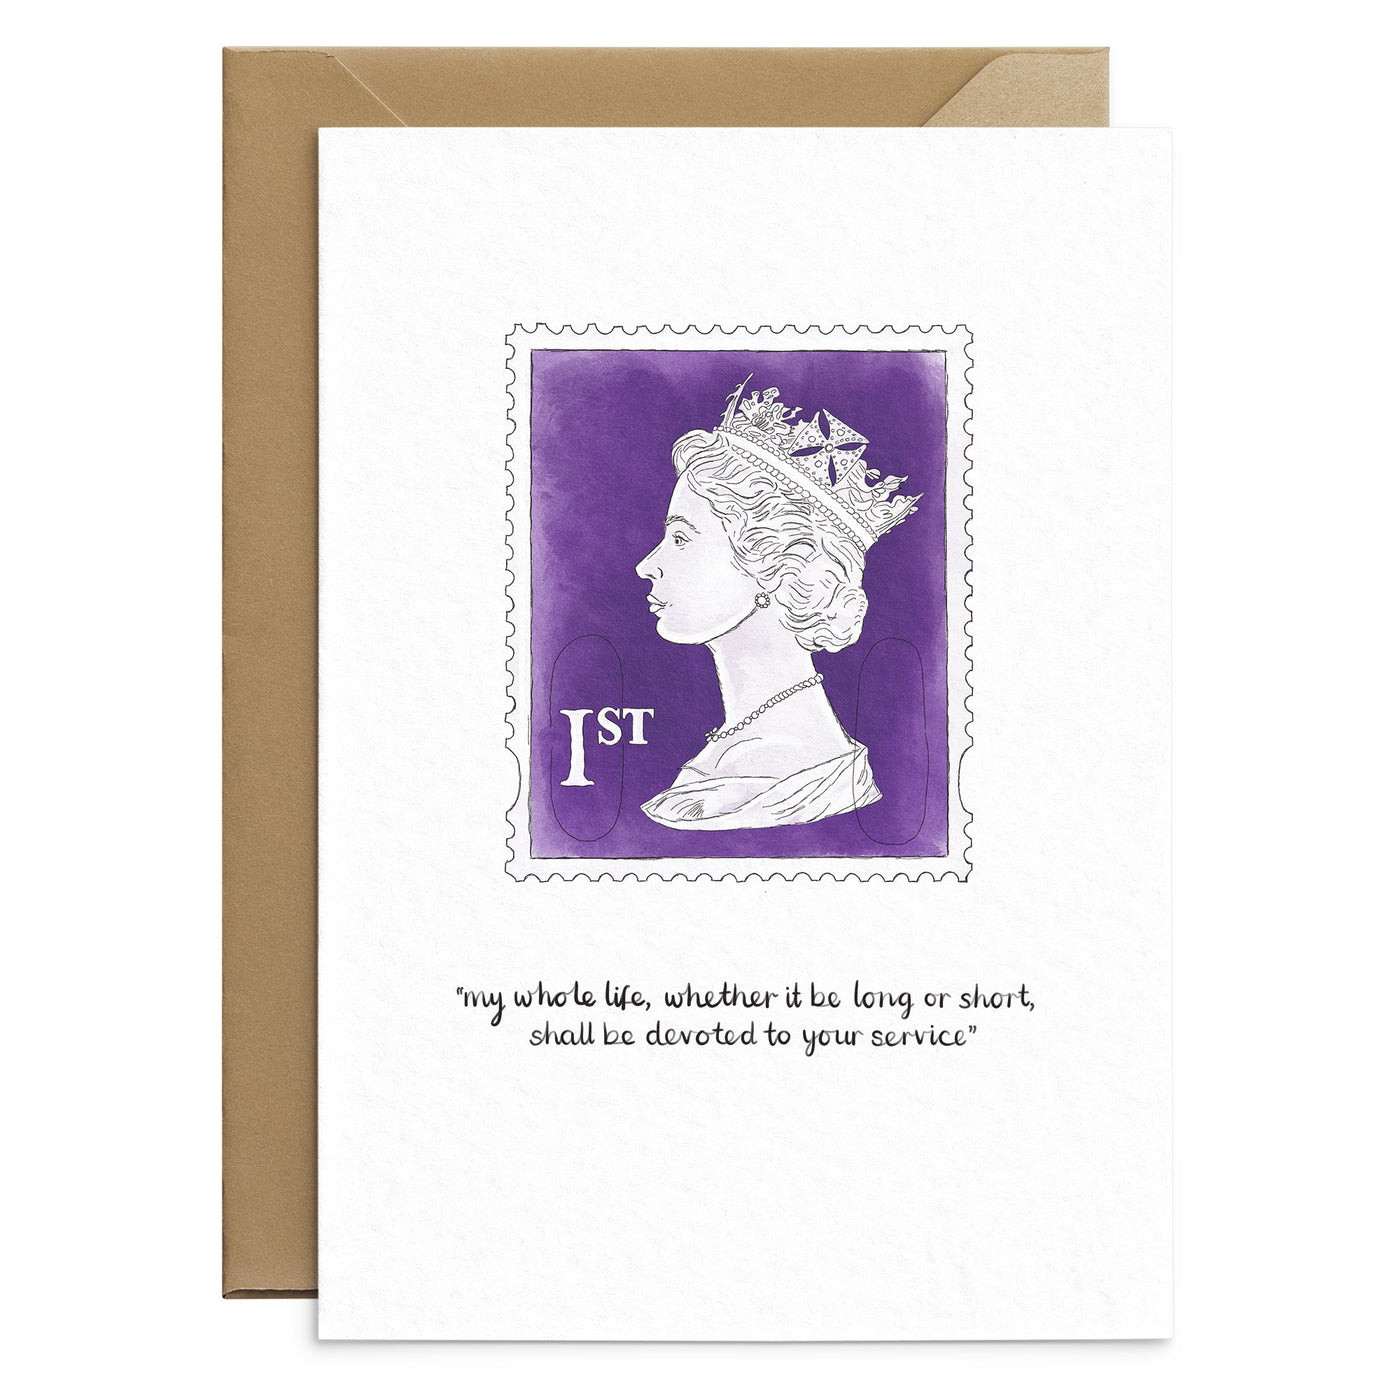 Queen-Elizabeth-II-Postage Stamp-Remembrance-Greetings-Card-Poppins-and-co